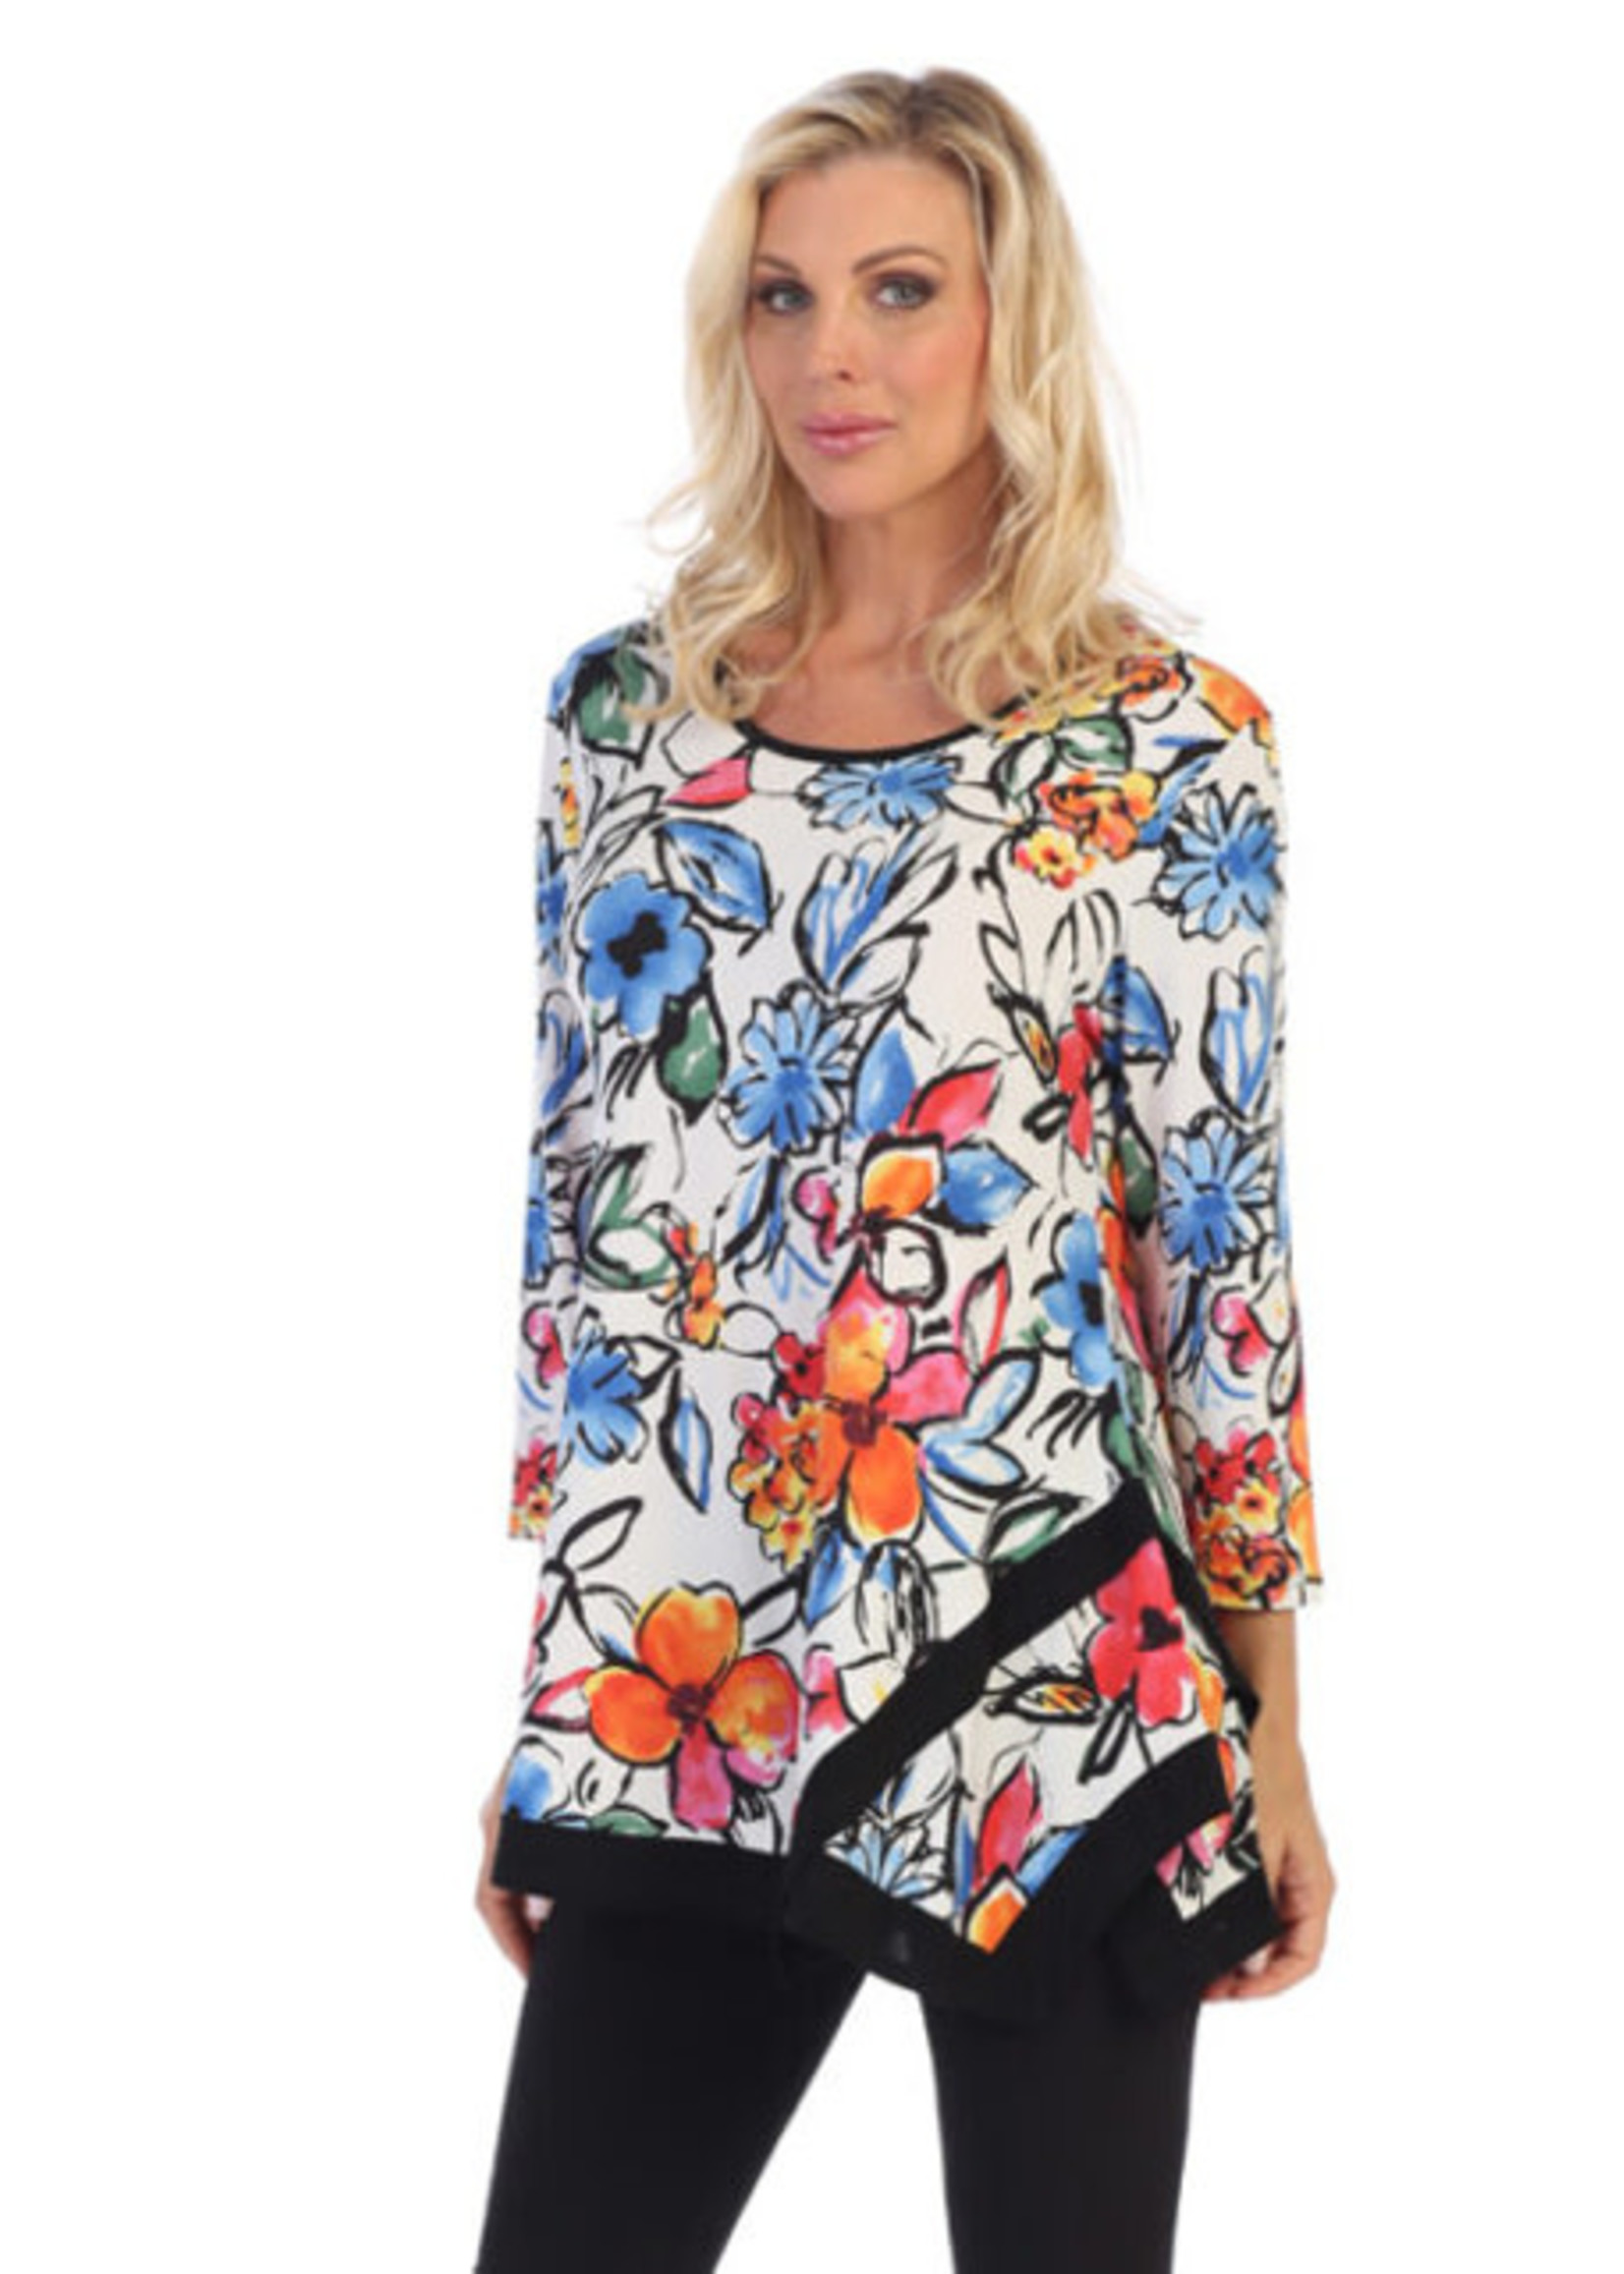 Caribe Floral With Black Trim 3/4 Sleeve Swing Tunic